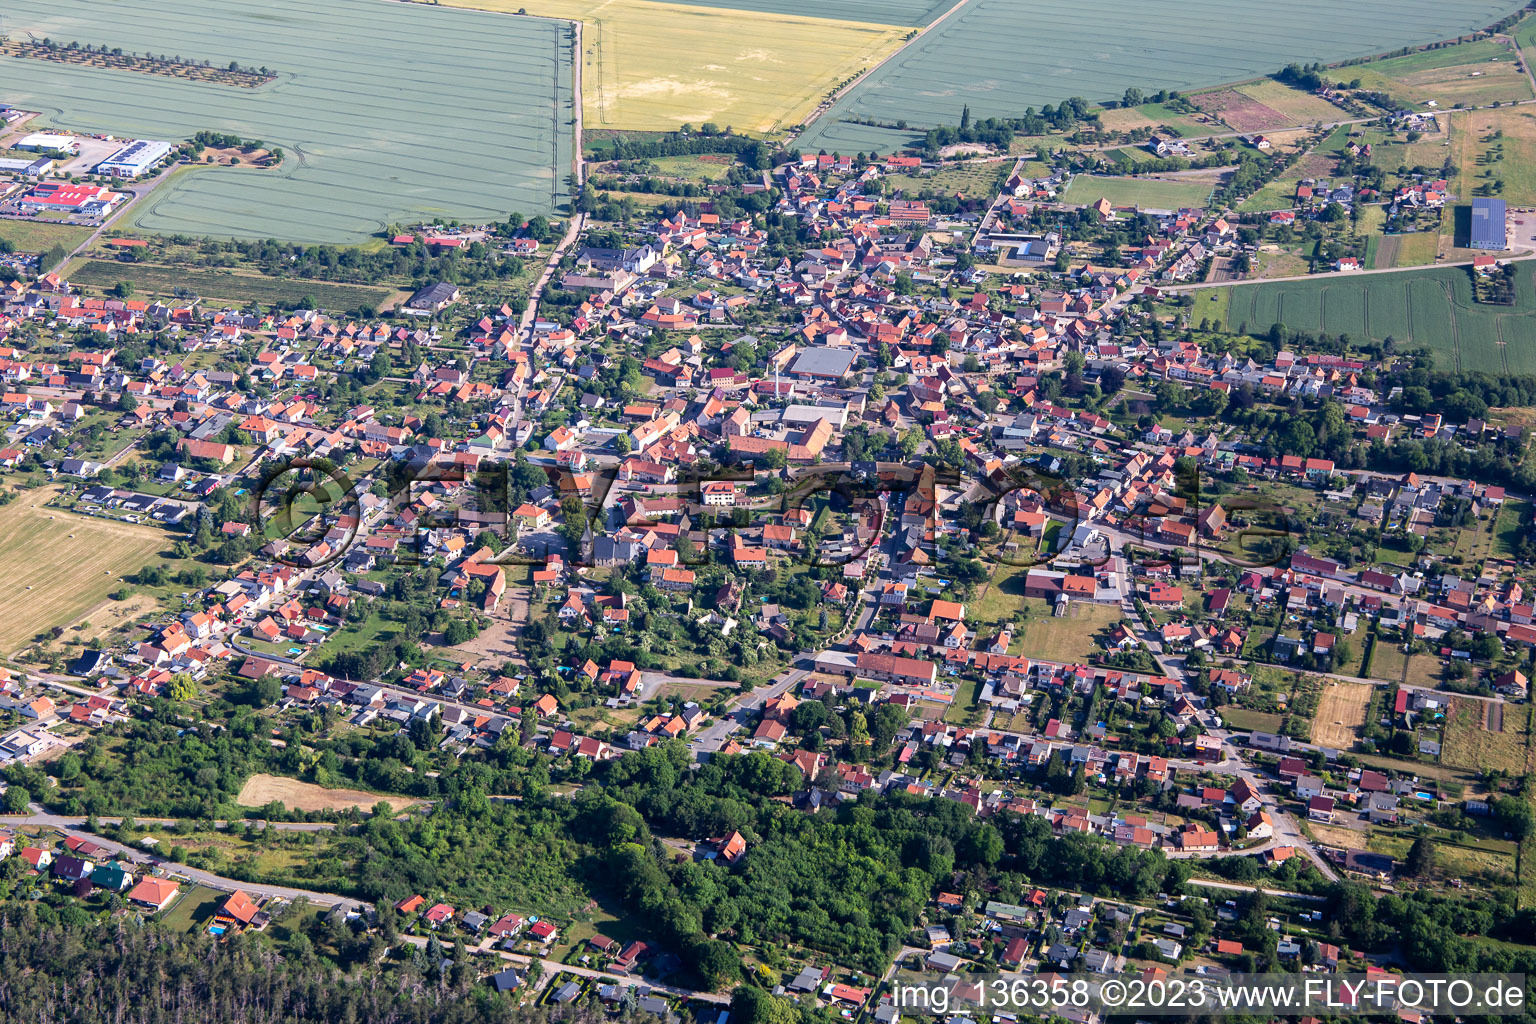 From the south in the district Rieder in Ballenstedt in the state Saxony-Anhalt, Germany